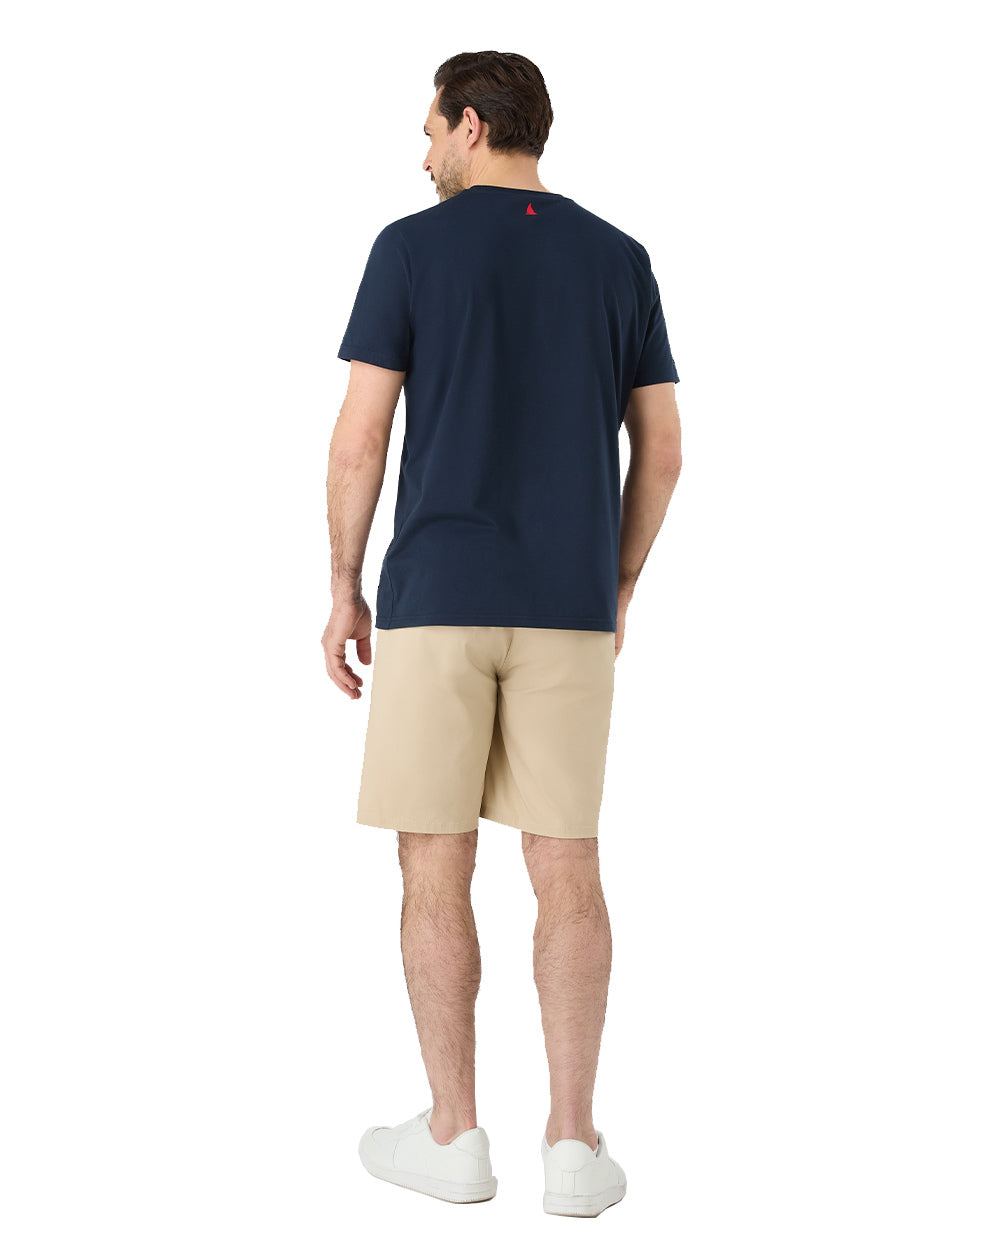 Beige Coloured Musto Mens RIB Fast Dry Shorts On A White Background 